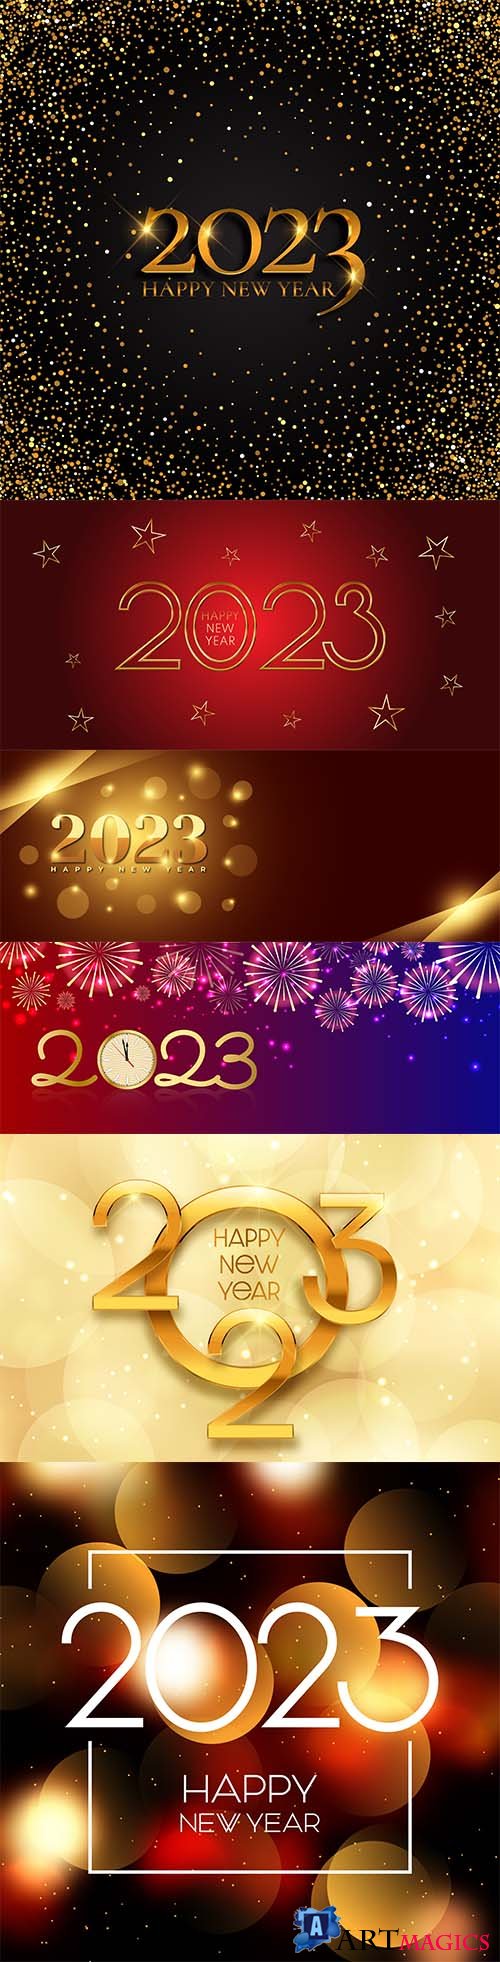 Vector happy new year background with gold numbers 2023 and confetti